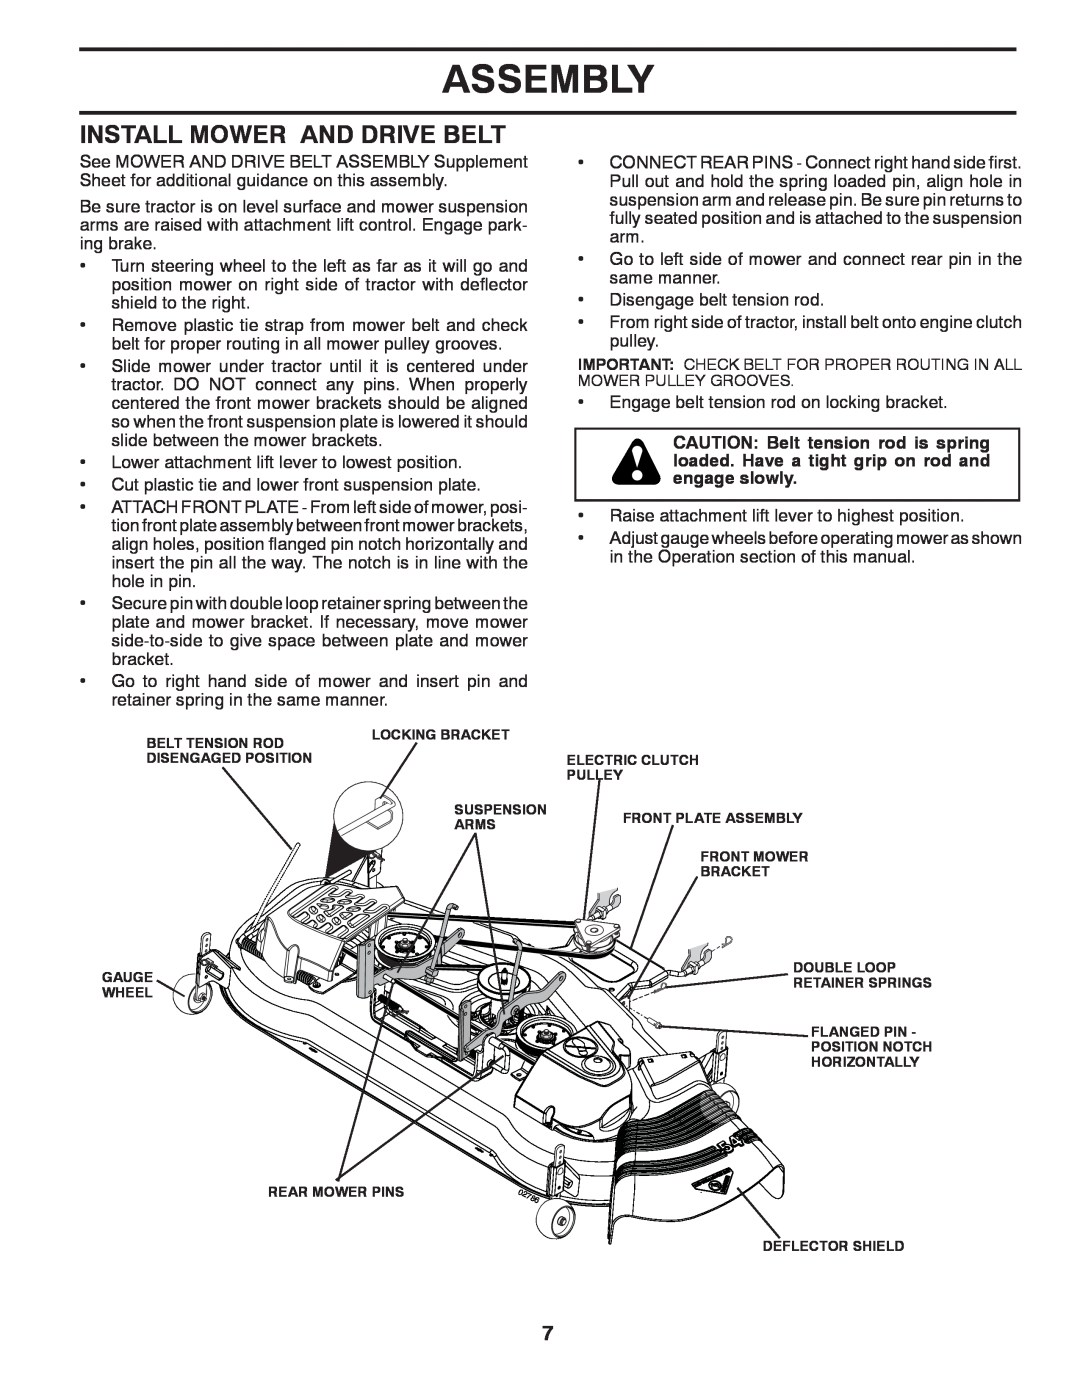 Husqvarna YTH2454 owner manual Install Mower And Drive Belt, Assembly 